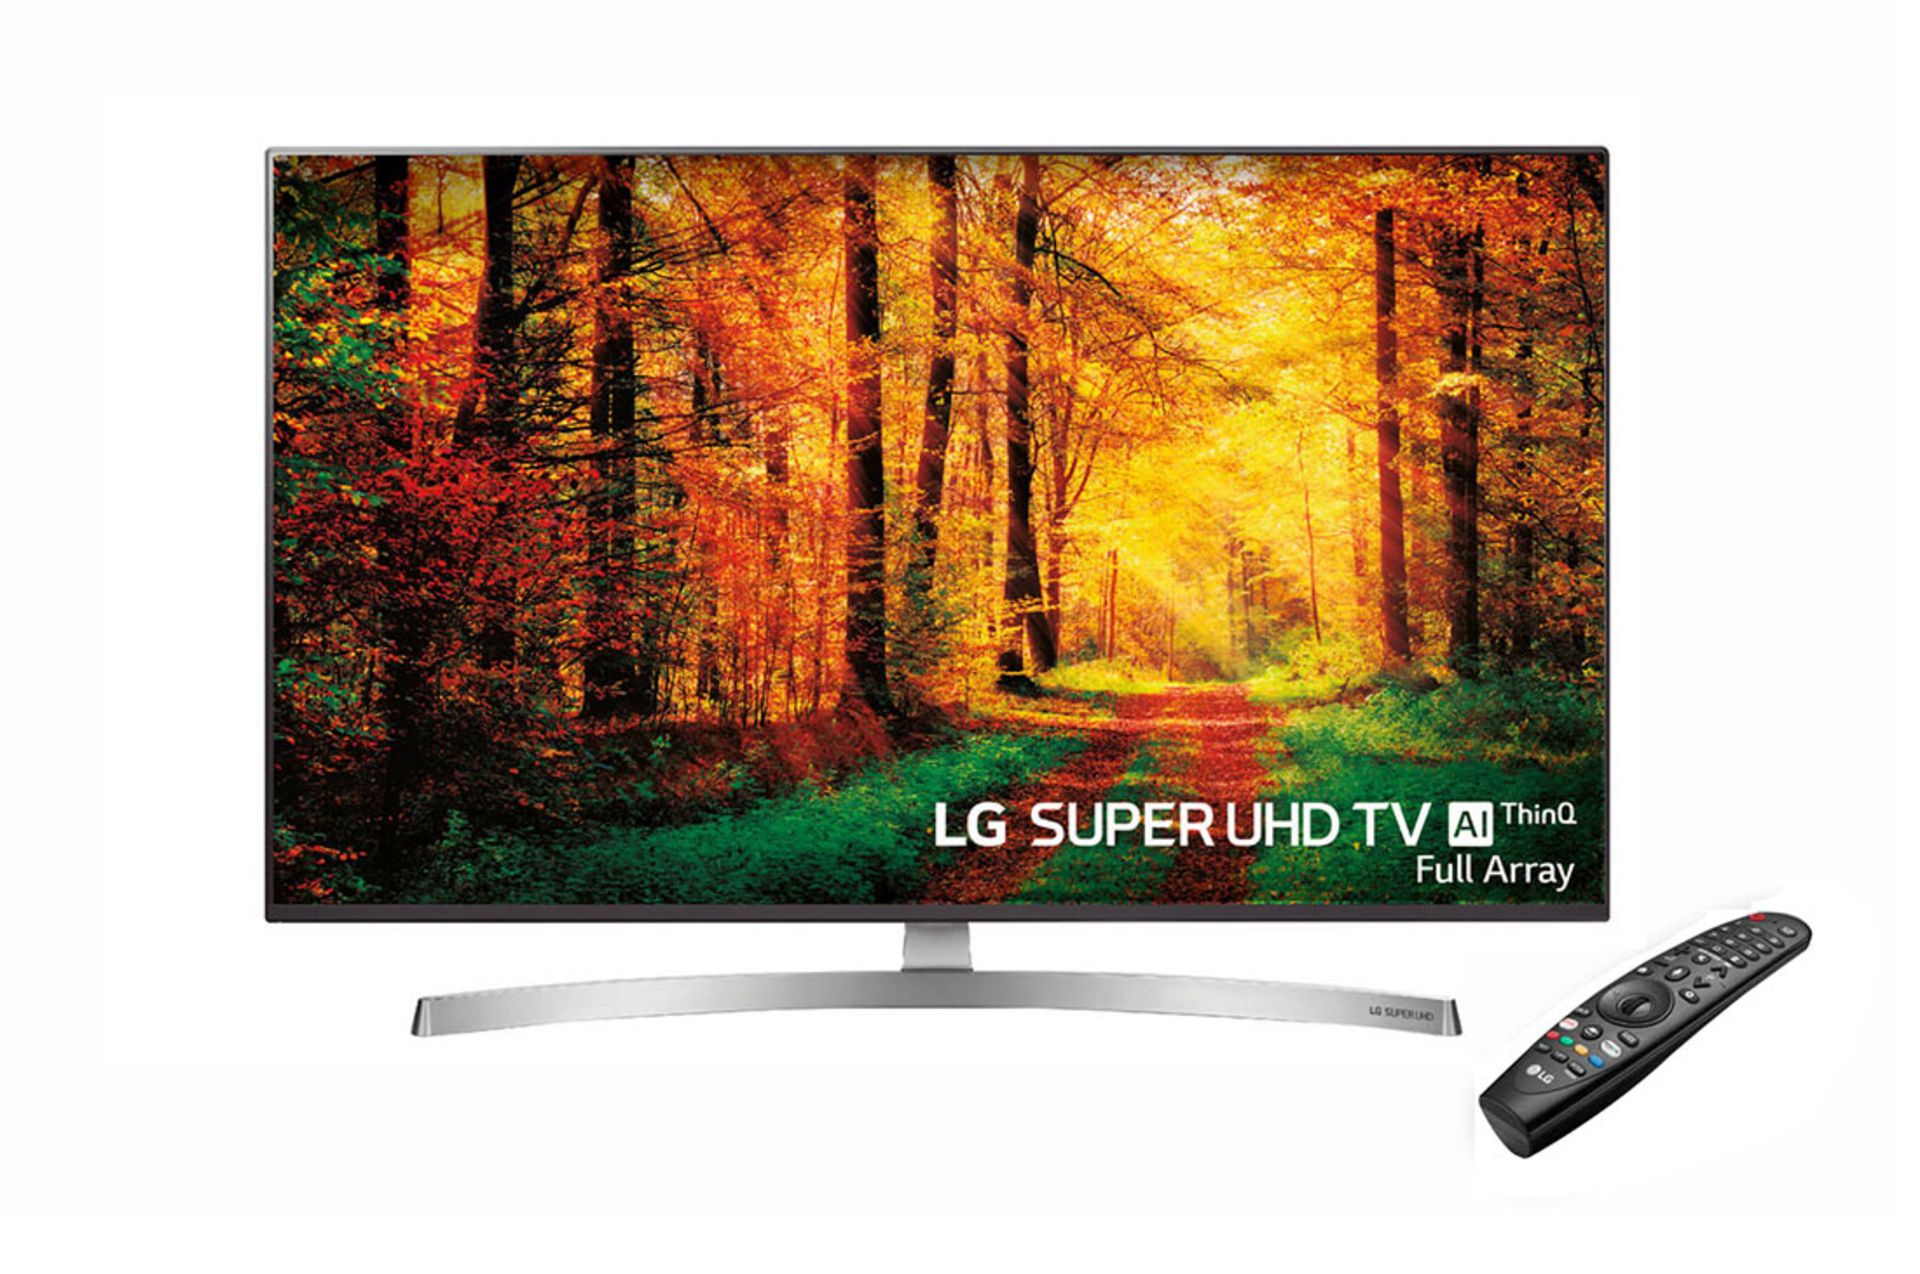 V Grade A LG 55 Inch ACTIVE HDR 4K SUPER ULTRA HD NANO LED SMART TV WITH FREEVIEW HD & WEBOS 4.0 & - Image 2 of 2